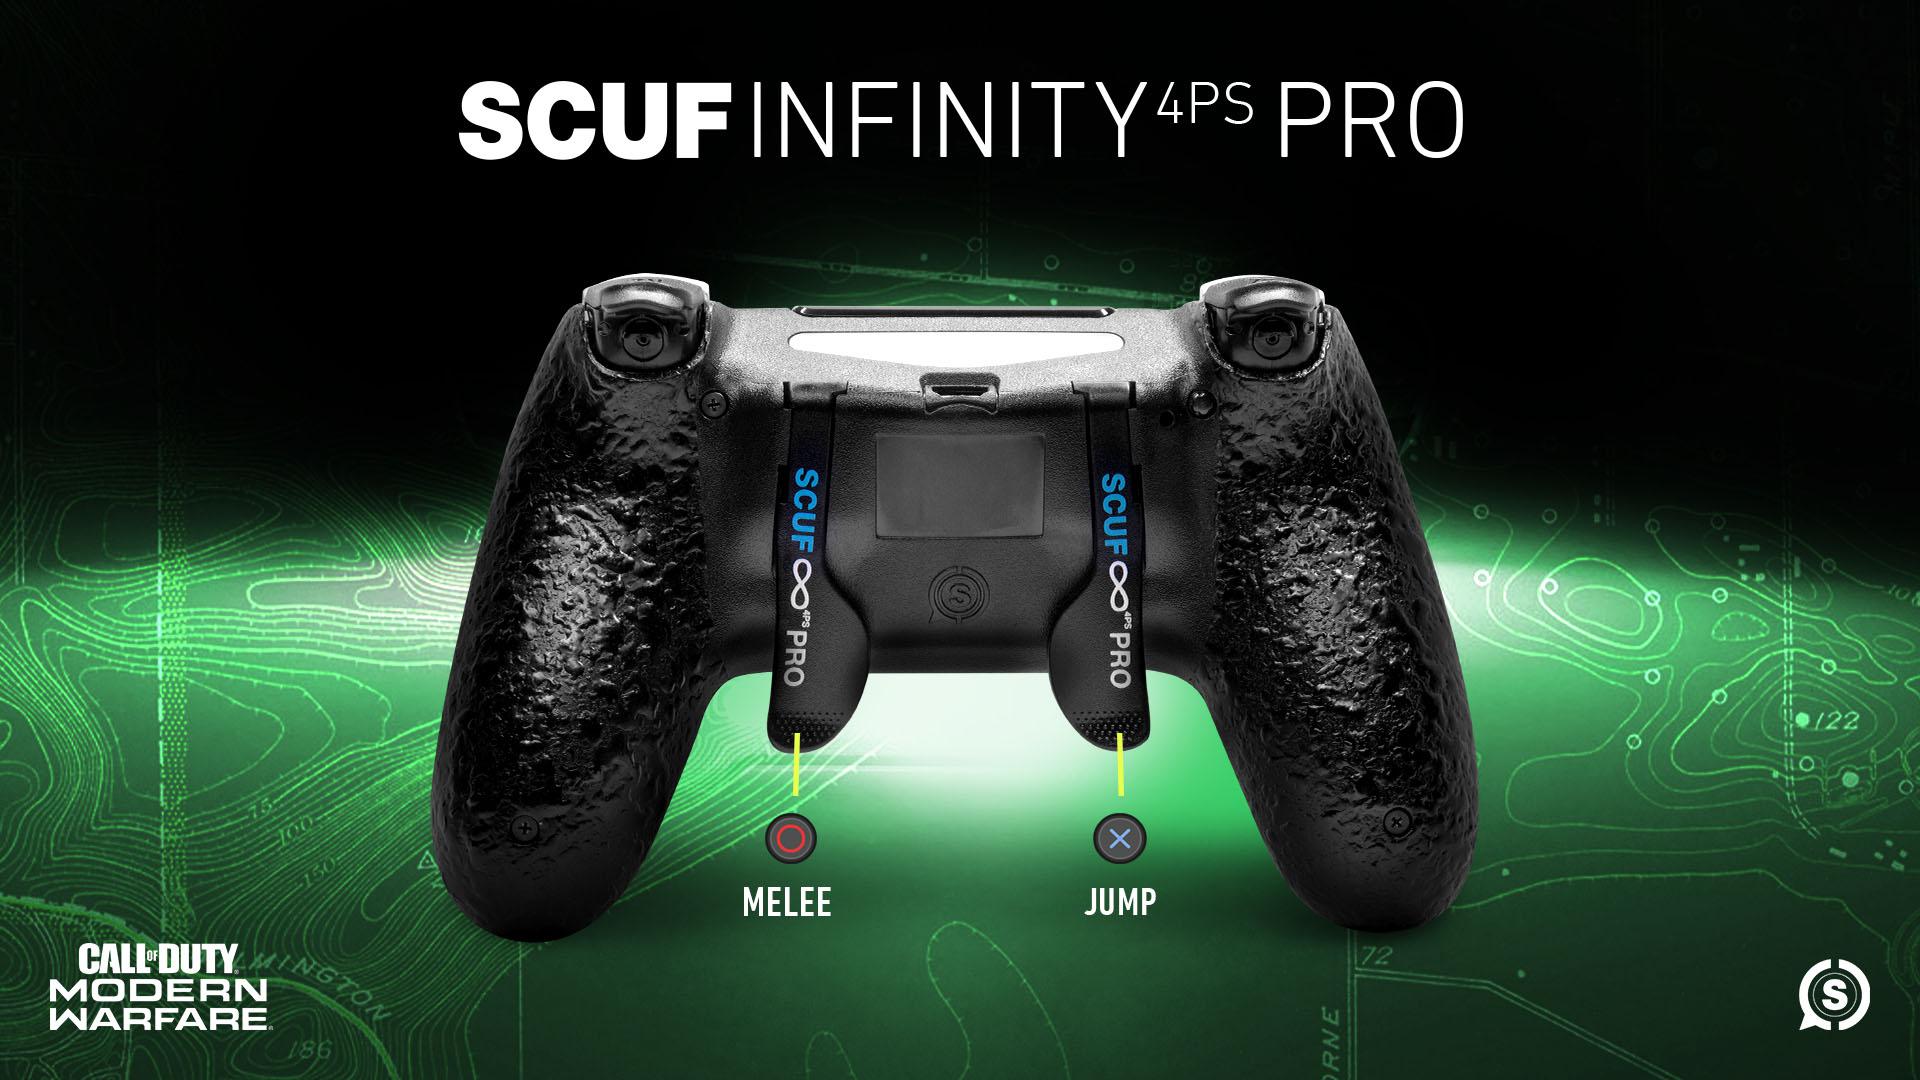 SCUF Infinity4PSPRO COD MW PS4 CONTROLLER SET UP